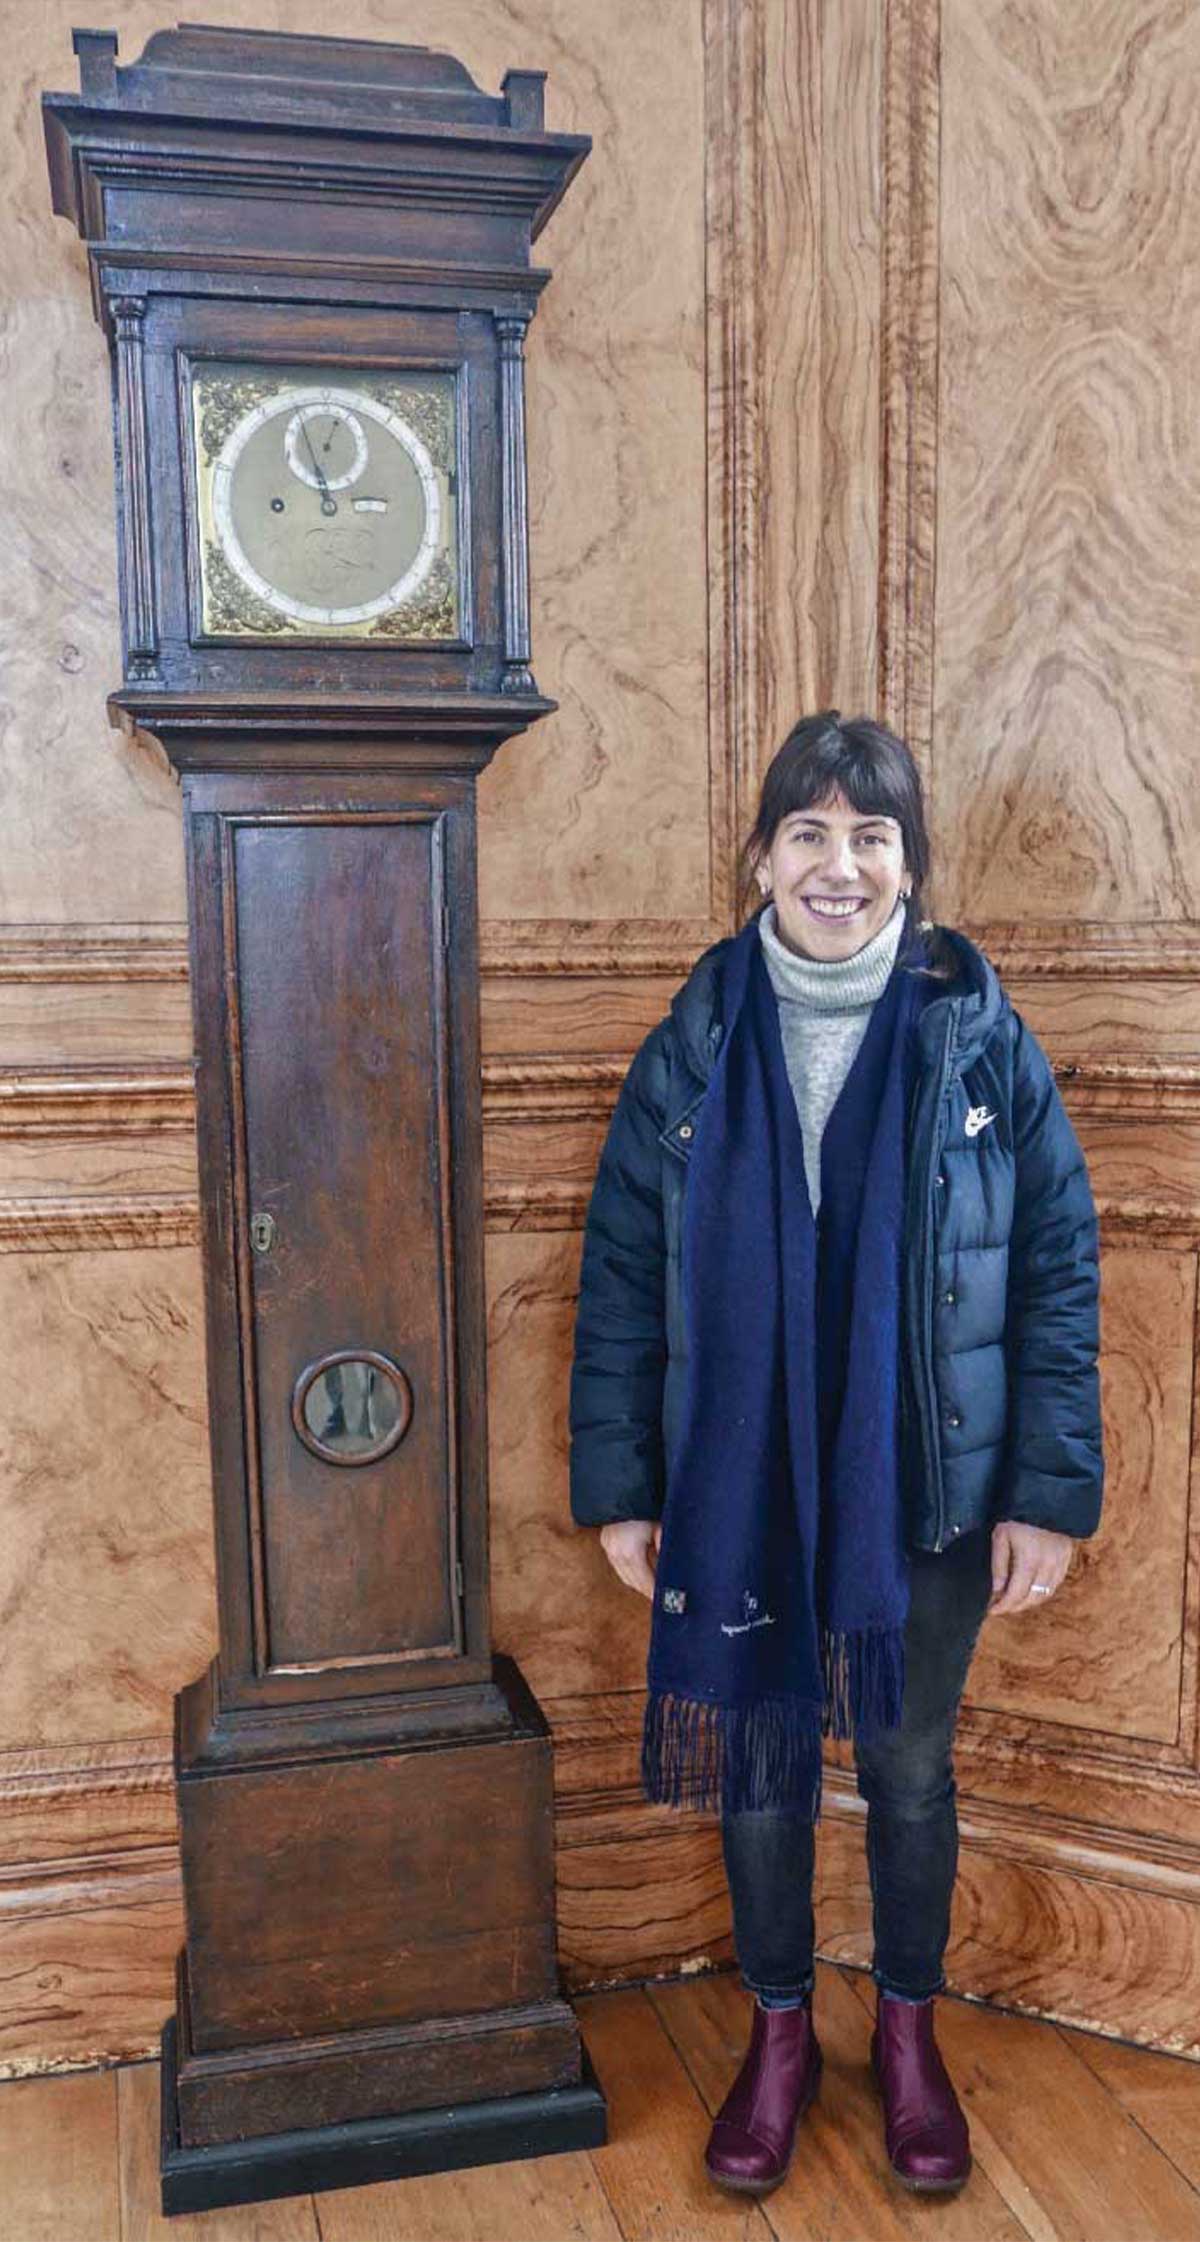 Smiling woman with black hair wearing a blue jacket and scarf standing beside a tall case clock